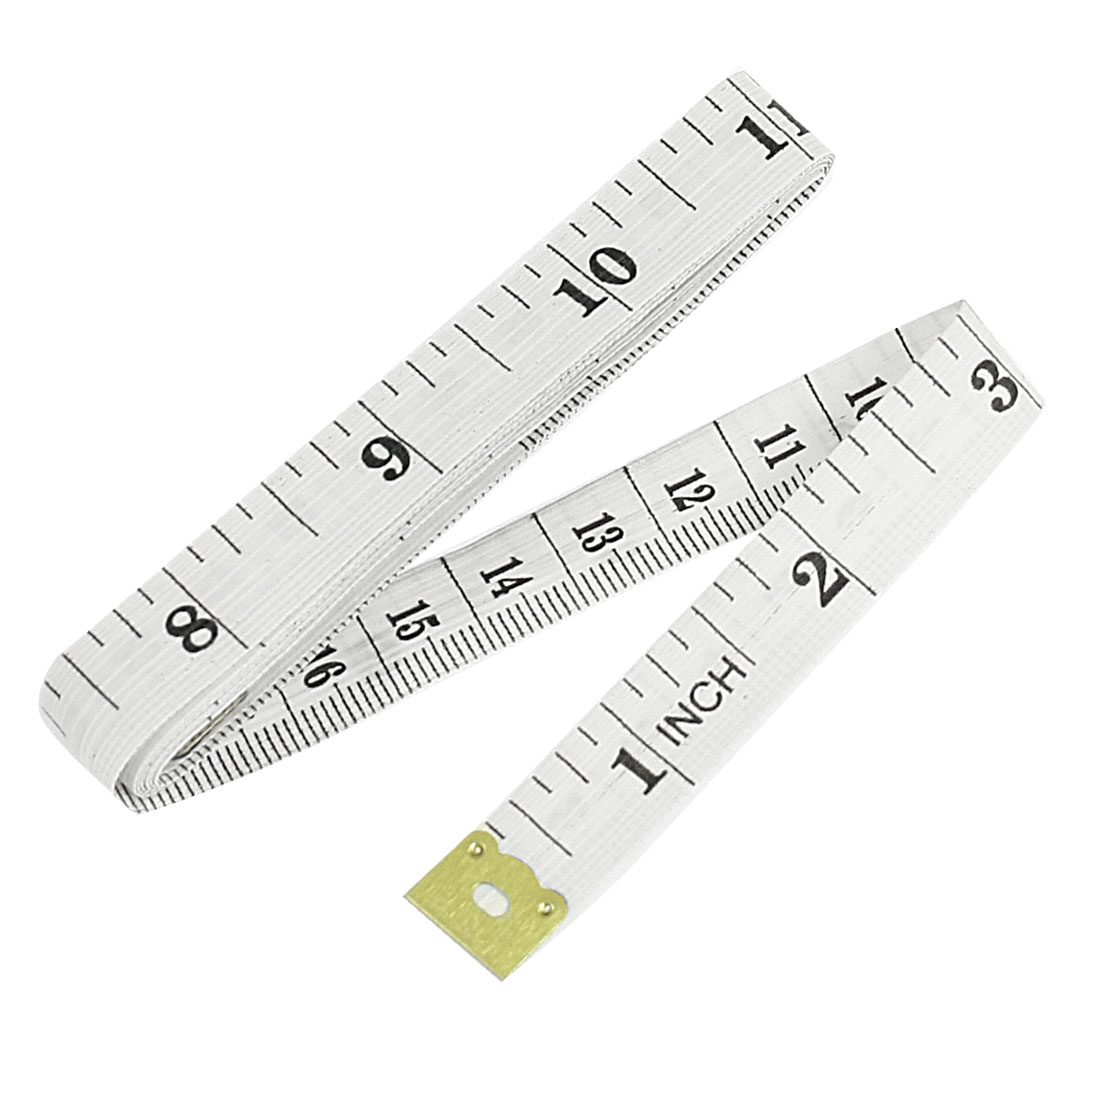 Unique Bargains 60-inch inch/Metric Tape Measure Tailor Sewing Cloth Ruler White - image 1 of 1